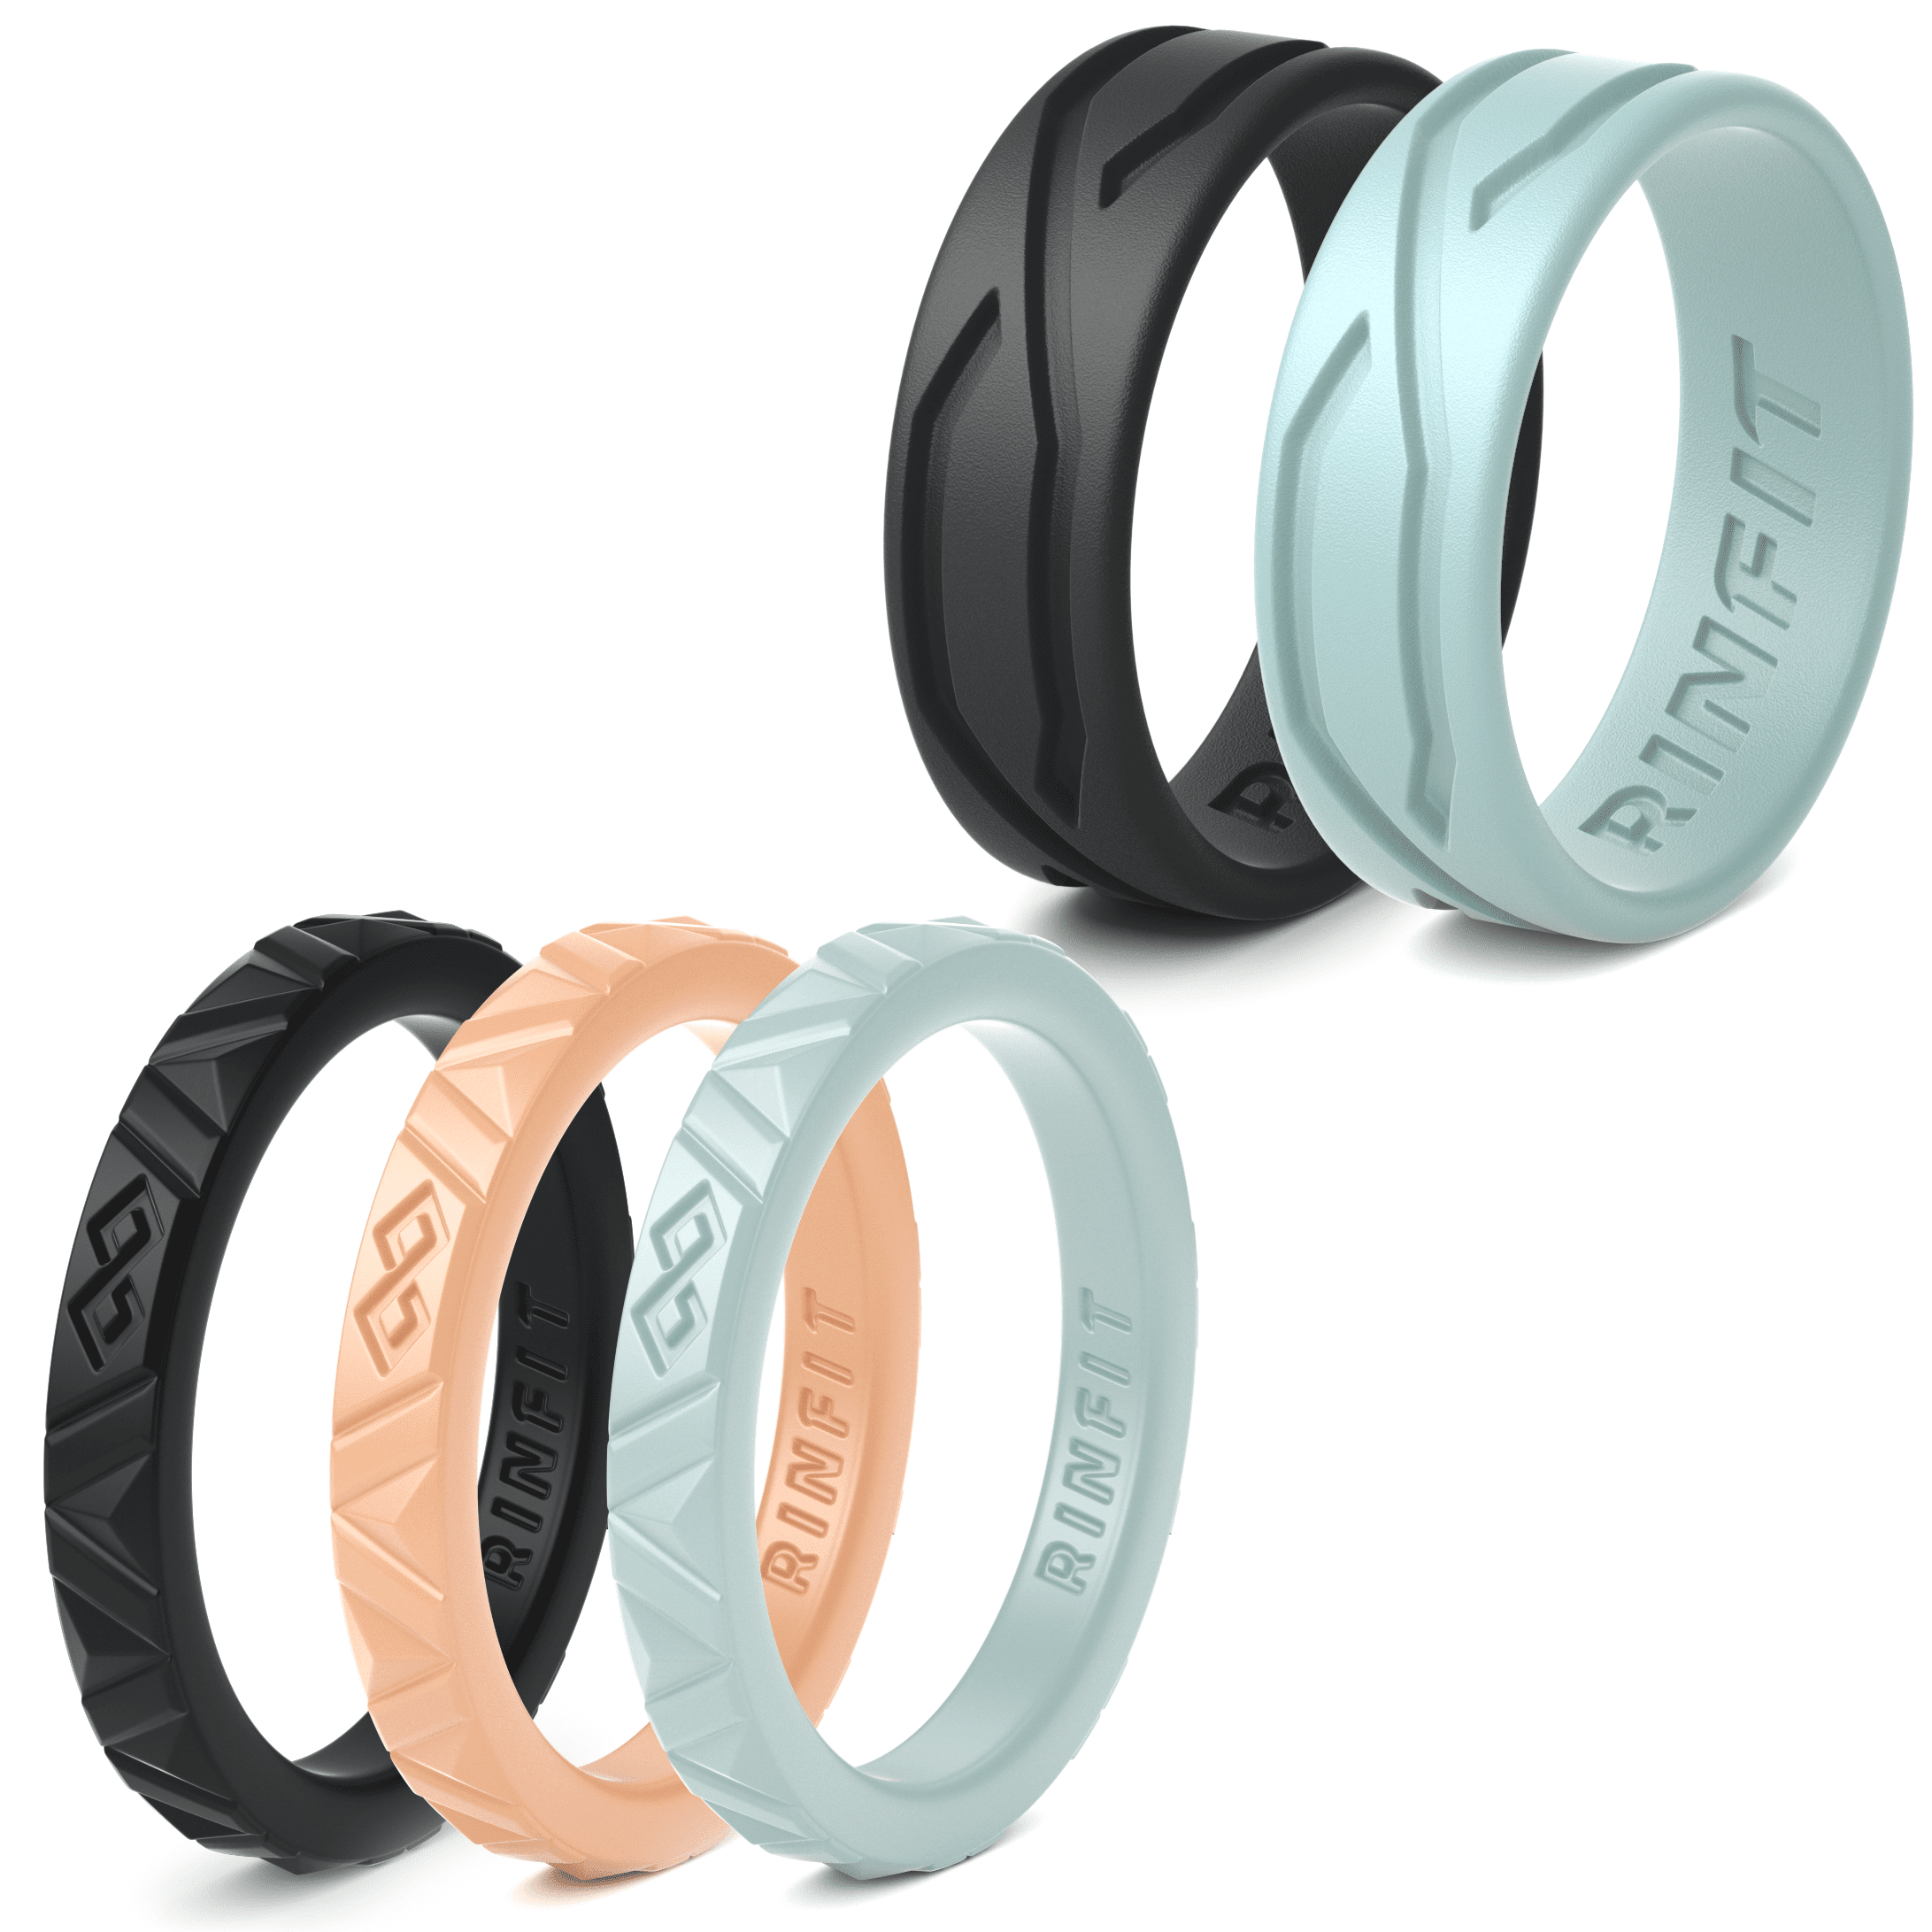 2 Pack & Singles U.S Rinfit Silicone Wedding Rings for Women Design Patent Pending. Designed & Soft Women's Silicone Bands 